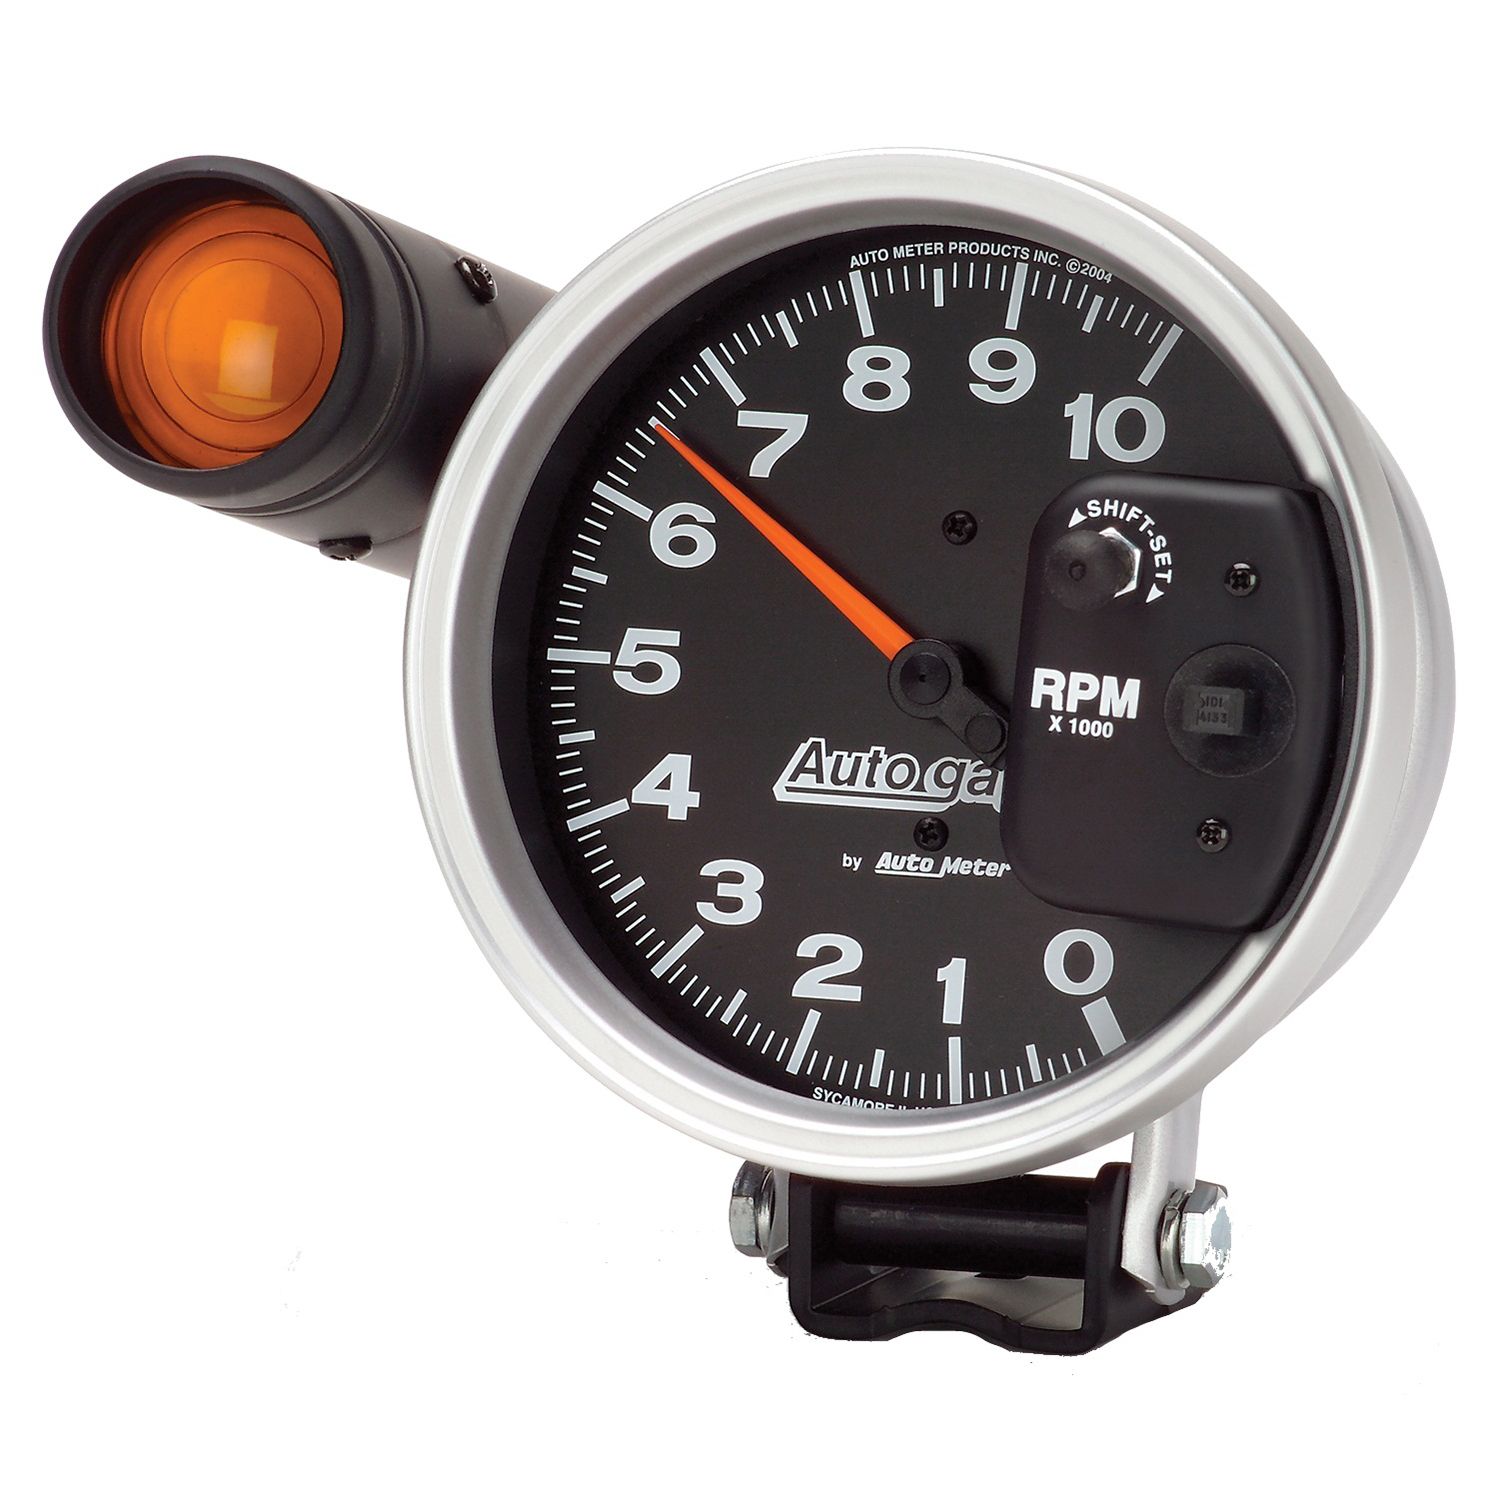 AutoMeter 5 inch 10,000 RPM Monster Shift Lite Pedestal Tachometer - Dirty Racing Products